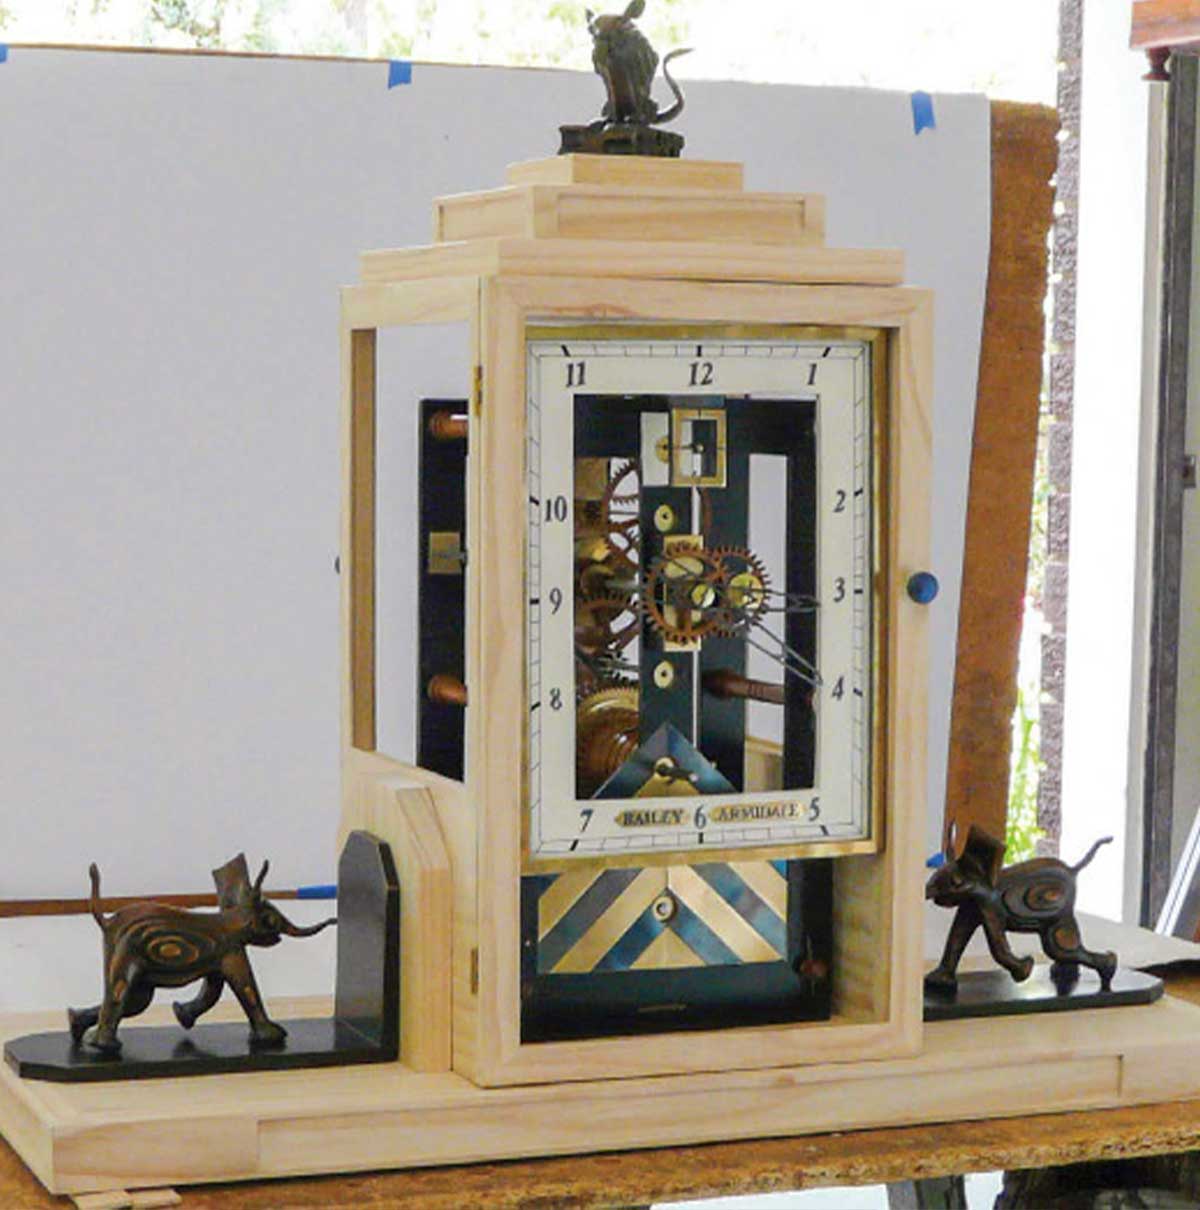 Pine clock case before finishing adorned with finished elephants and mouse